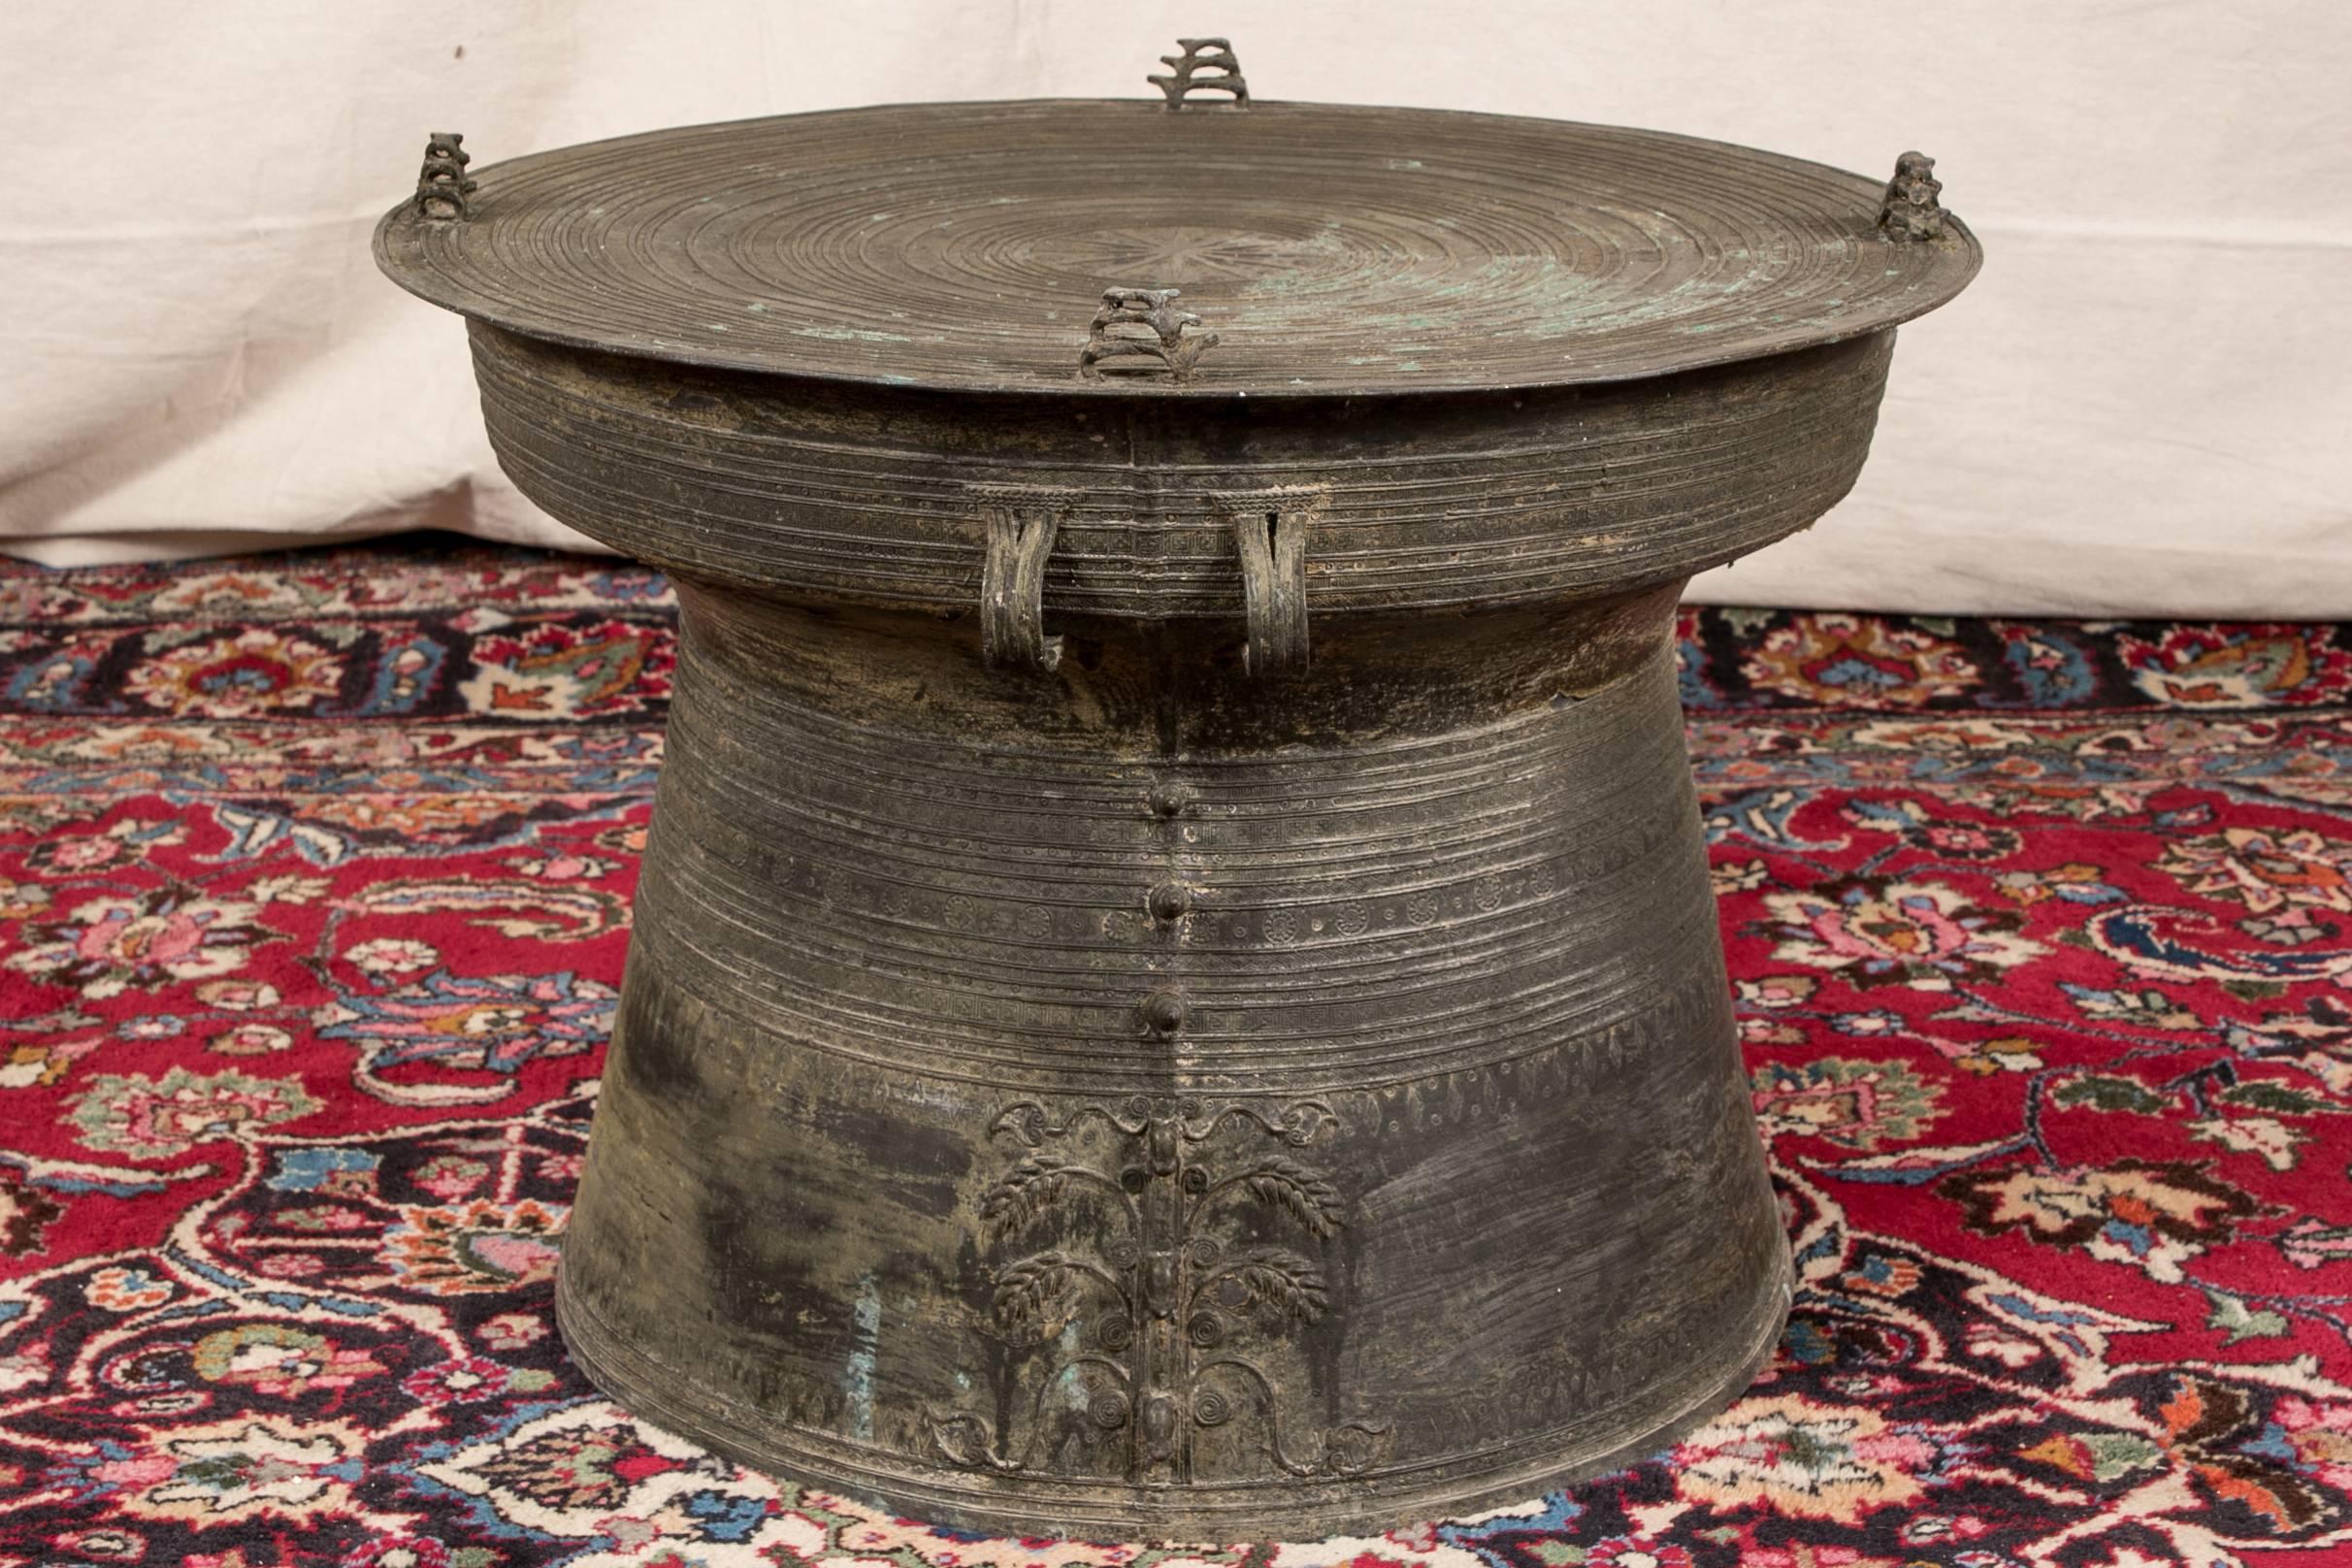 South Asian bronze rain drum table, circular with concentric circles on the top and curved sides decorated with geometric motifs, top with four pierced stylized animal motifs in tiers and a star in the centre. Loop handles on the sides, one side